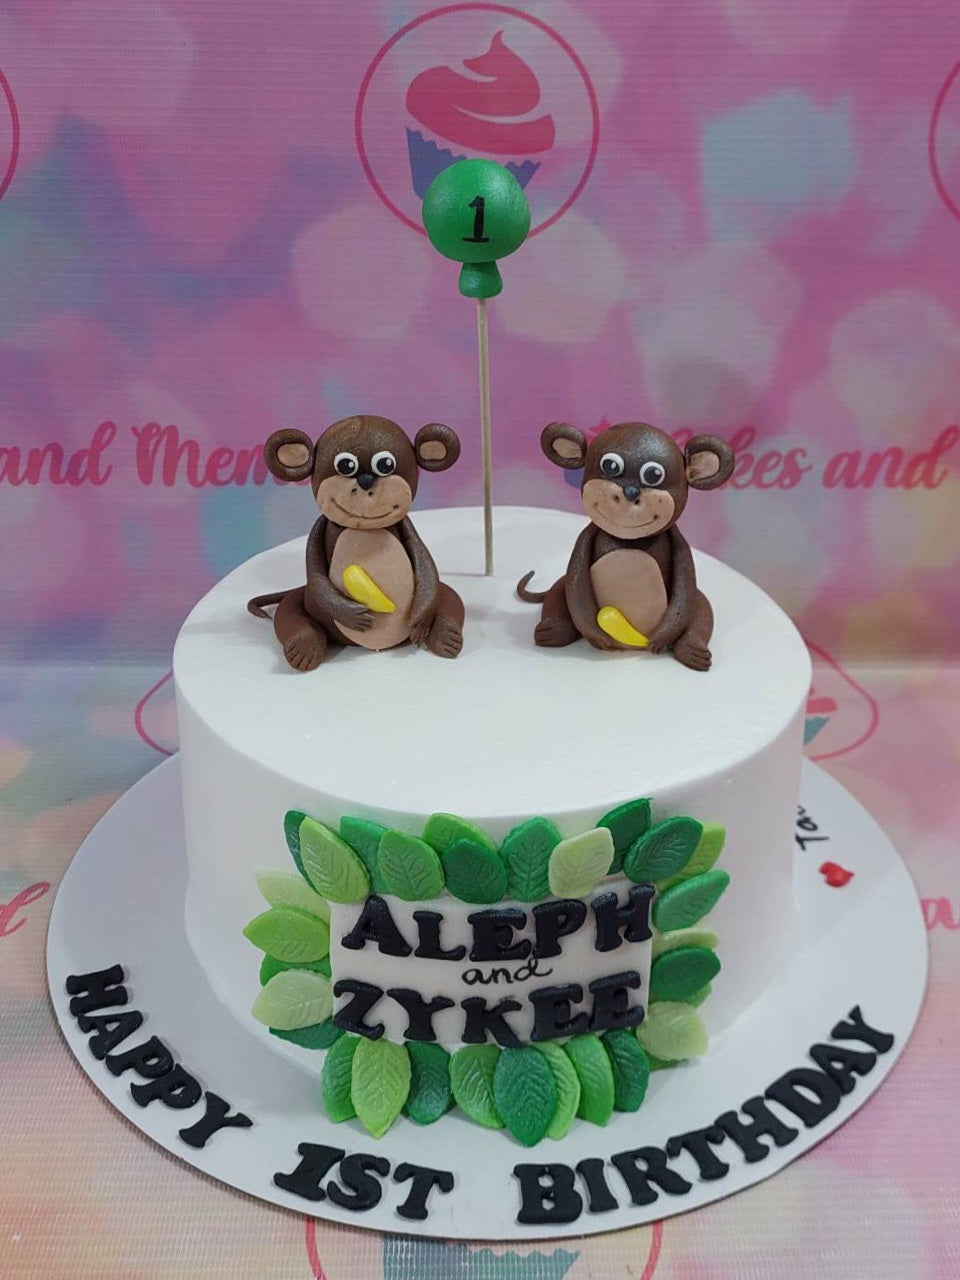 This jungle-themed Safari Cake is great for your little one's 1st birthday! It features white icing along with humorous animals like monkeys, giraffe and lion that bring the wild life to life. The custom-made cake is made with high quality ingredients and is perfect for any safari or outdoor-themed celebration!